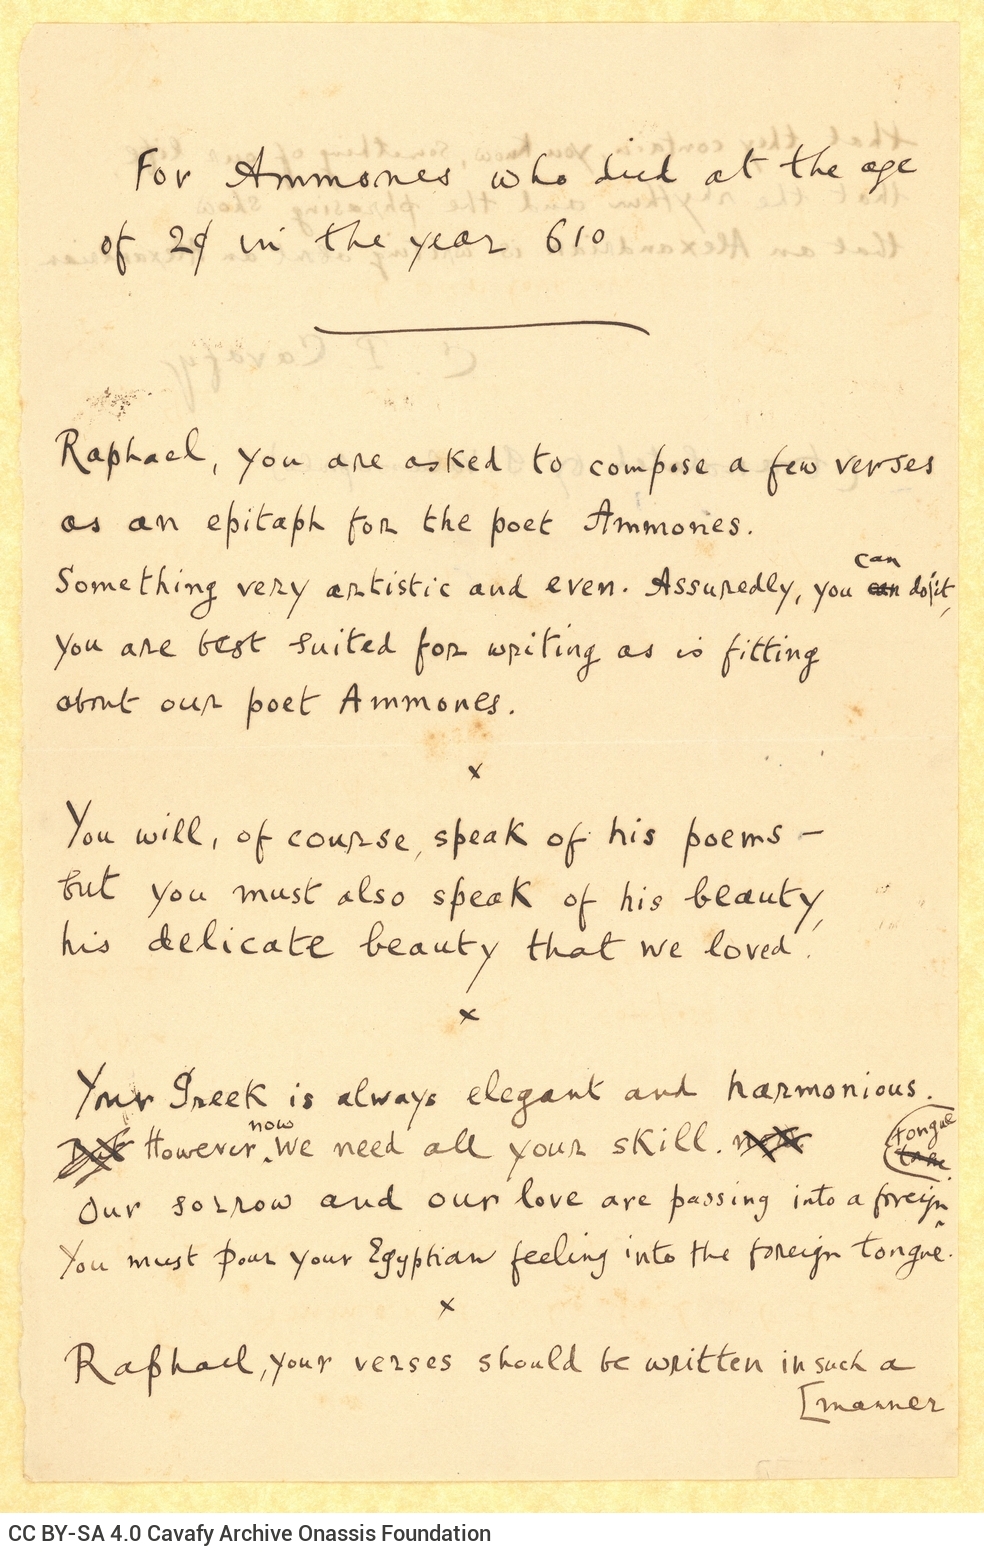 Handwritten English translation of the poem "For Ammones, Who Died at 29 Years of Age, in 610", by G. Valassopoulo on both